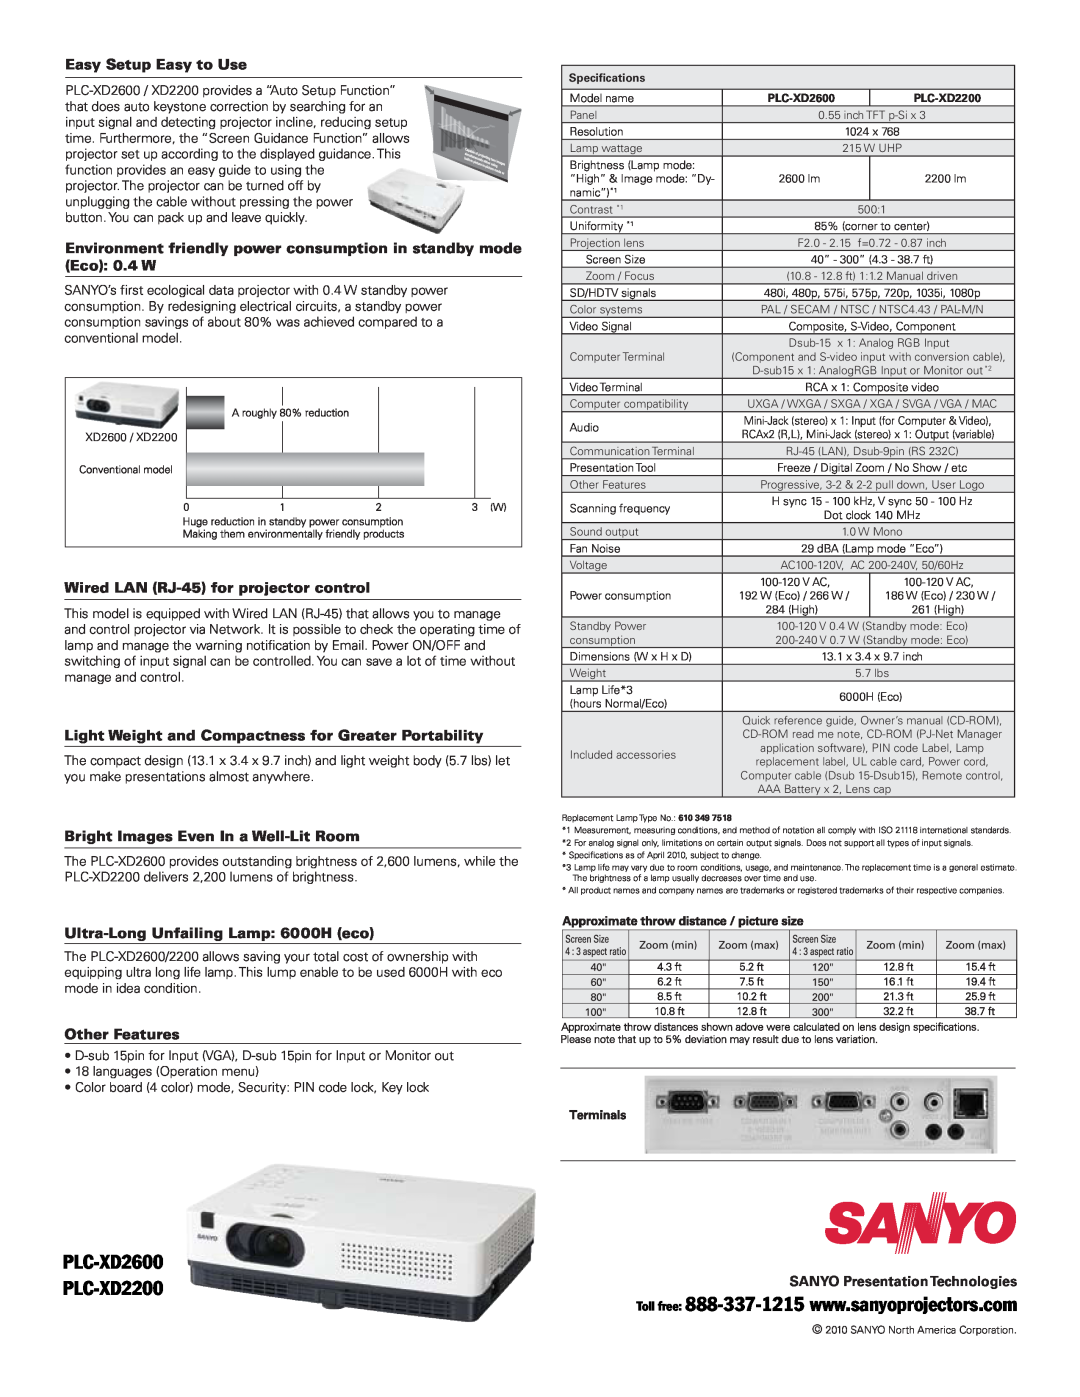 Sanyo manual PLC-XD2600 PLC-XD2200, Easy Setup Easy to Use, Wired LAN RJ-45for projector control, Other Features 